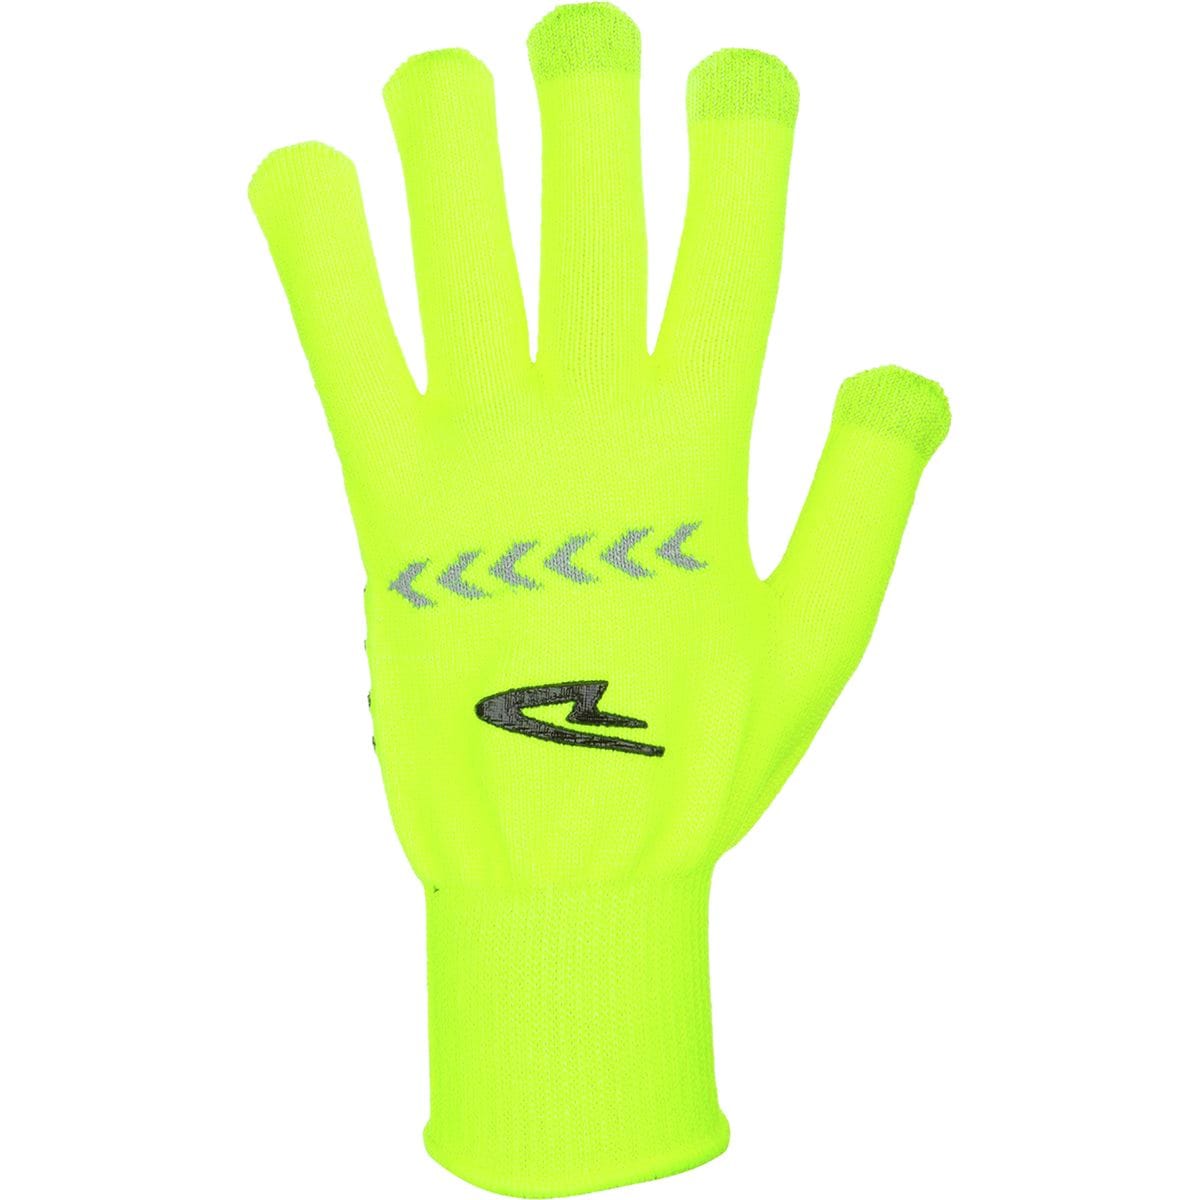 DeFeet Electronic Touch Gloves Reflective Mens